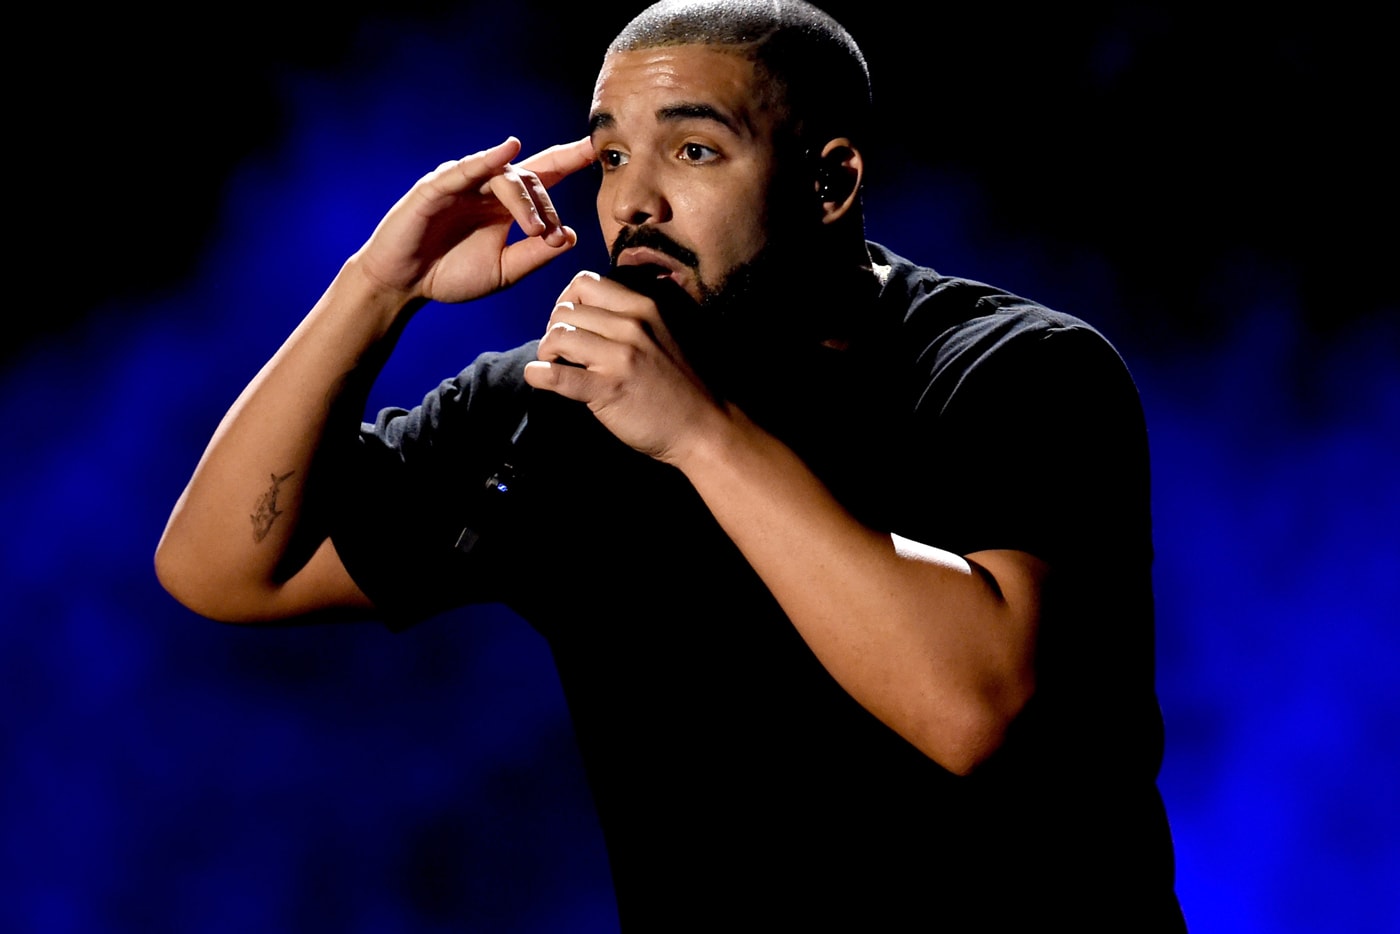 Drake Scorpion No number one 1 Billboard 200 albums albums chart 2018 london wireless music festival nike ovo soccer football kit jersey octobers very own stage concert performance mic great britain united kingdom uk flag